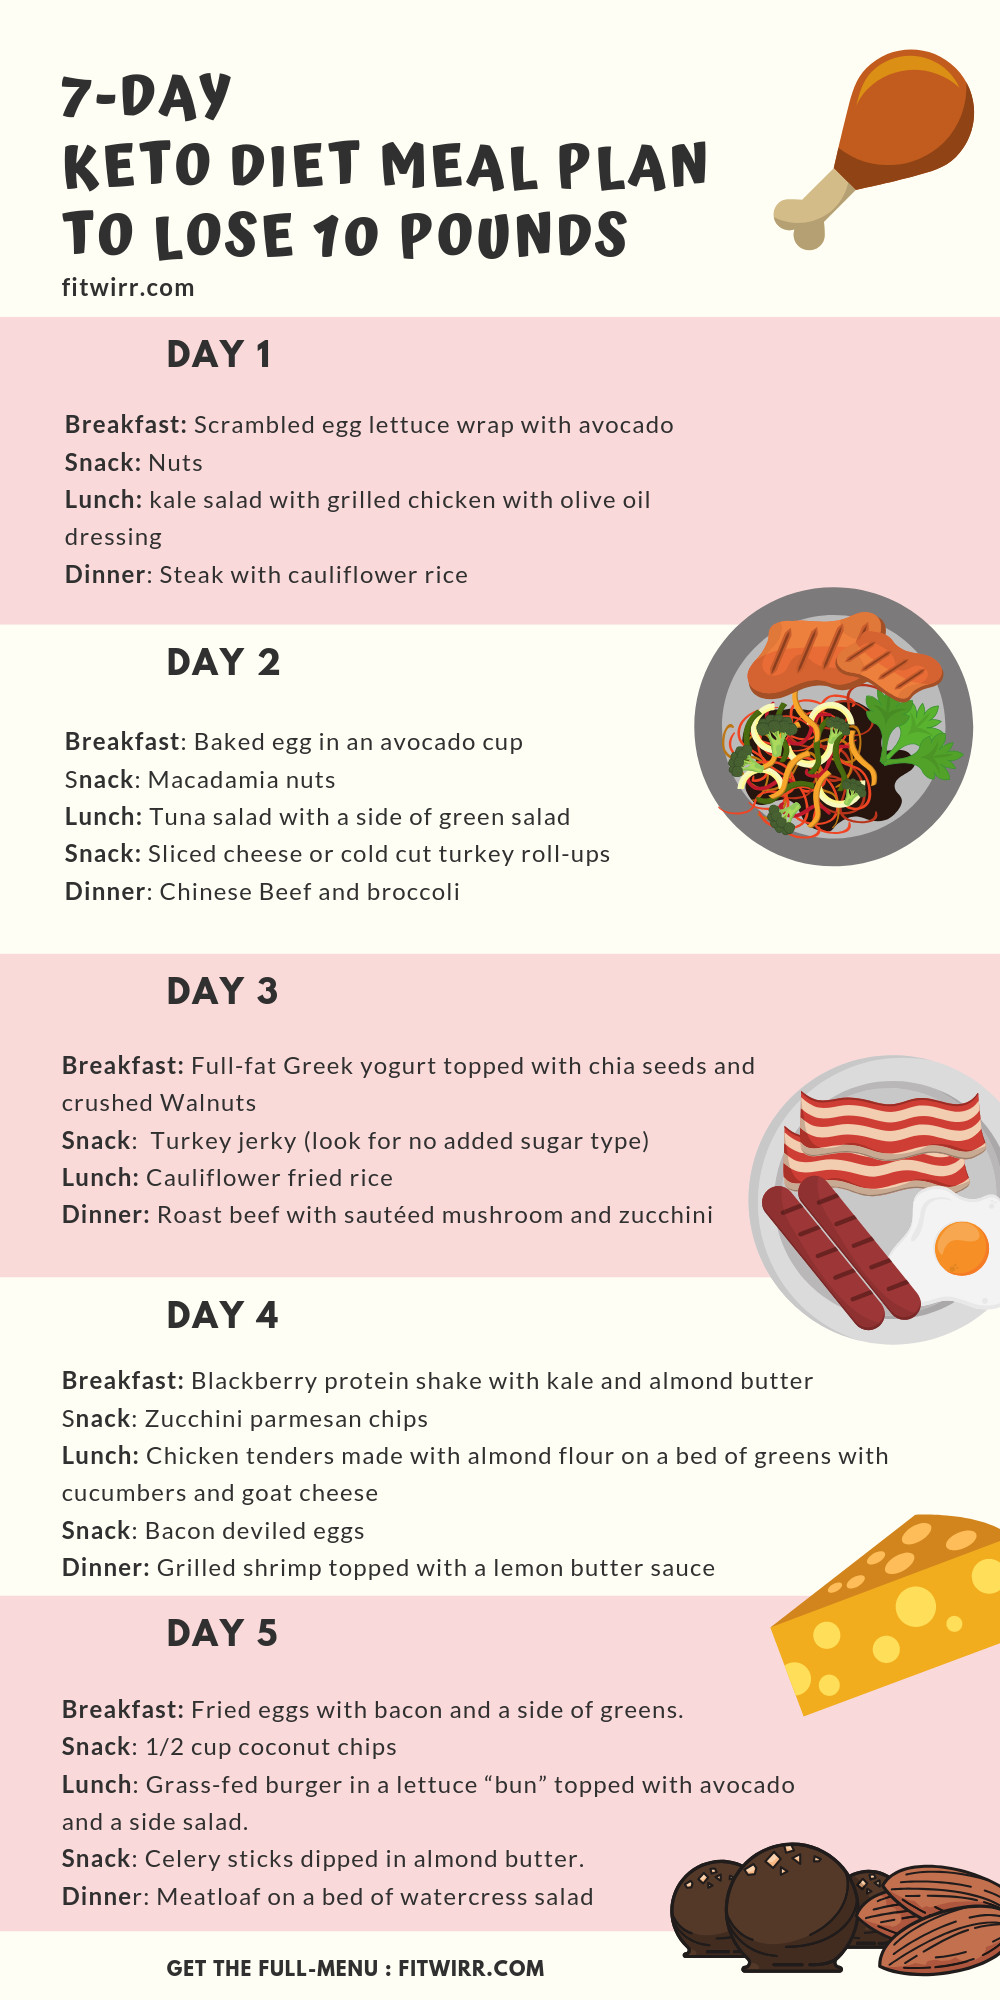 Keto Diet For Beginners Losing Weight Easy
 Keto Diet Menu 7 Day Keto Meal Plan for Beginners to Lose